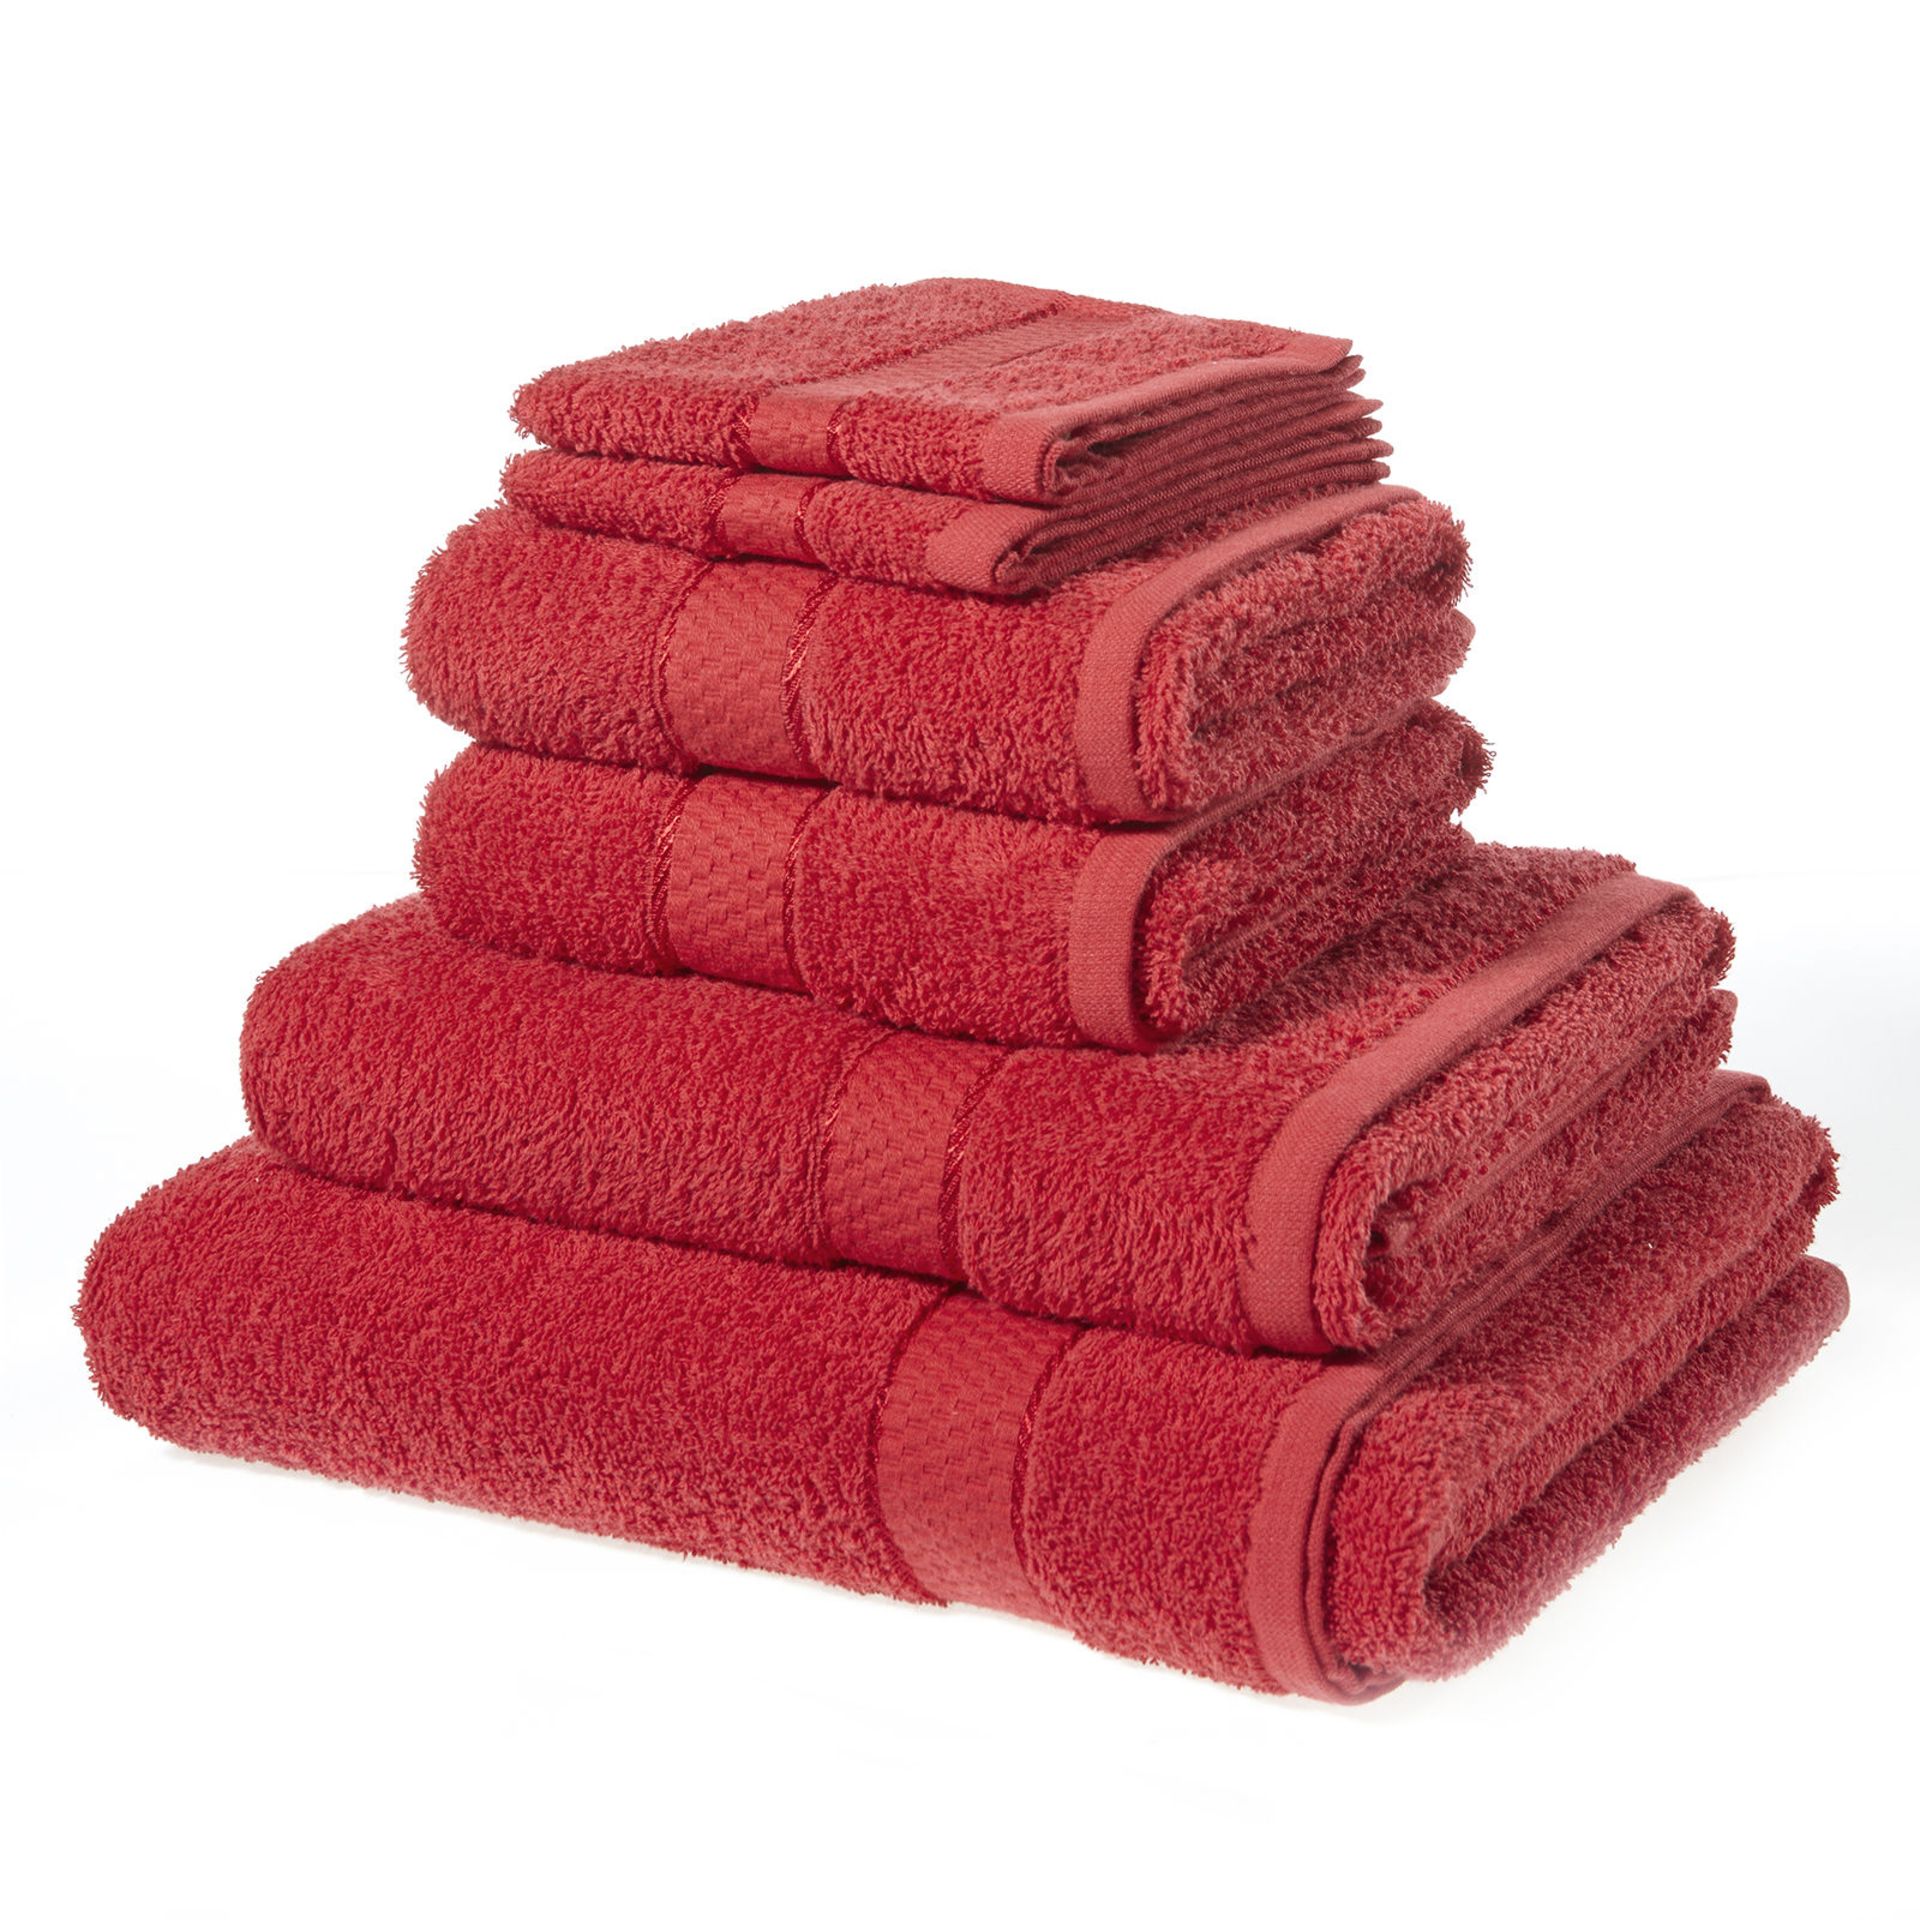 V *TRADE QTY* Brand New Red 6 Piece Towel Bale Set With 2 Face Towels - 2 Hand Towels - 1 Bath Sheet